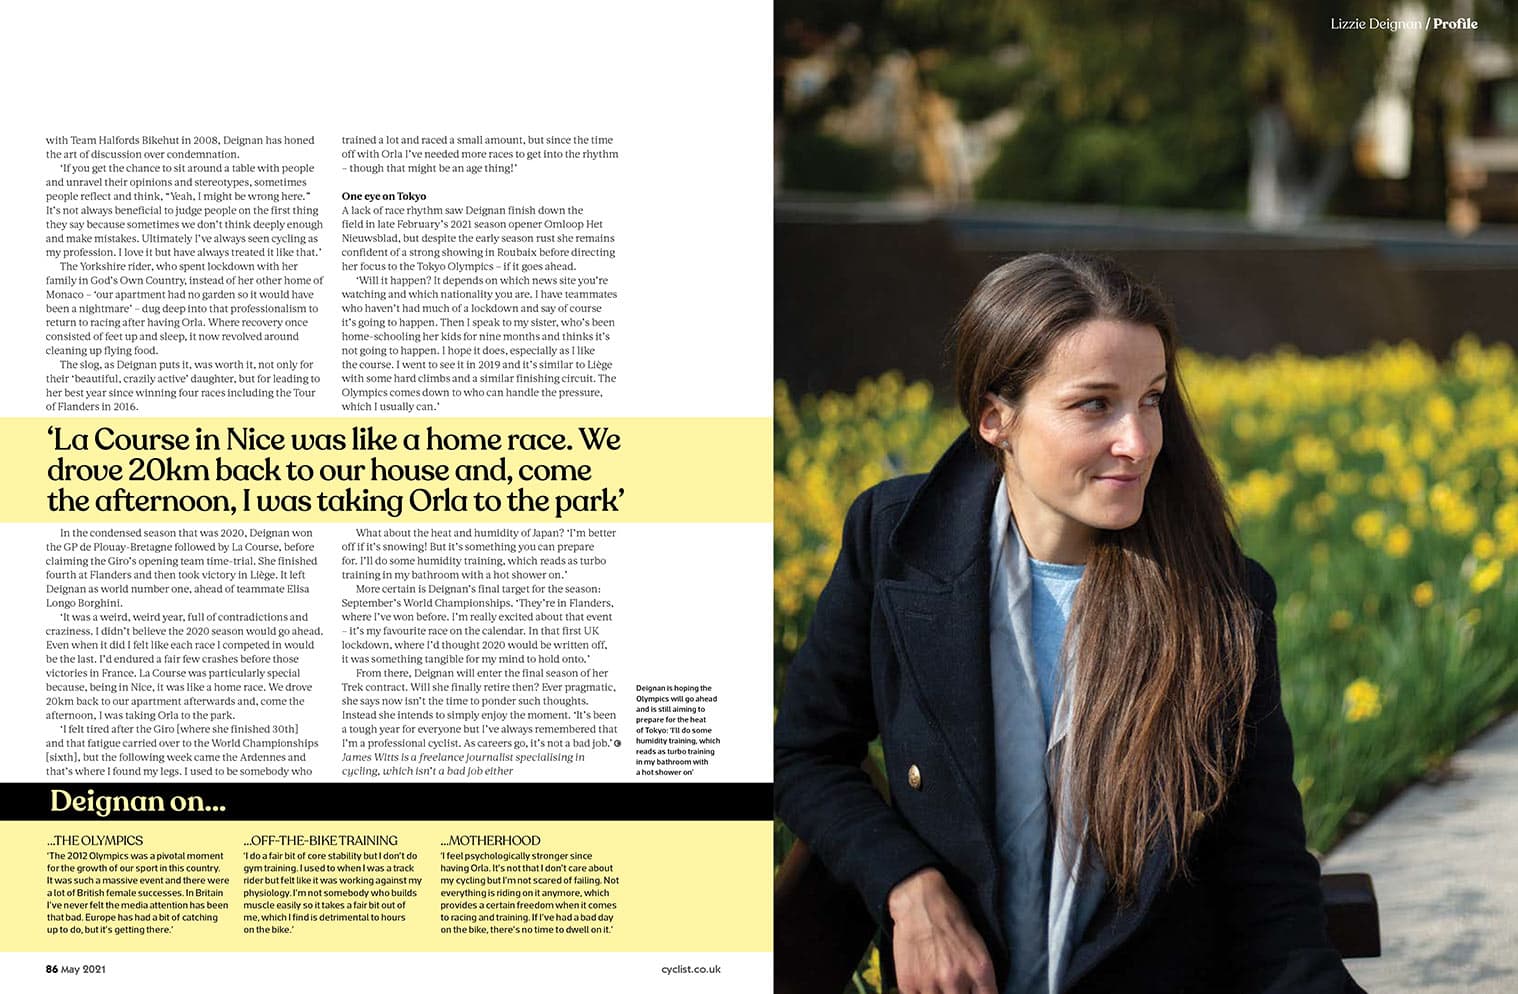 Double page spread from magazine showing portrait of Lizzie Deignan in a park, right